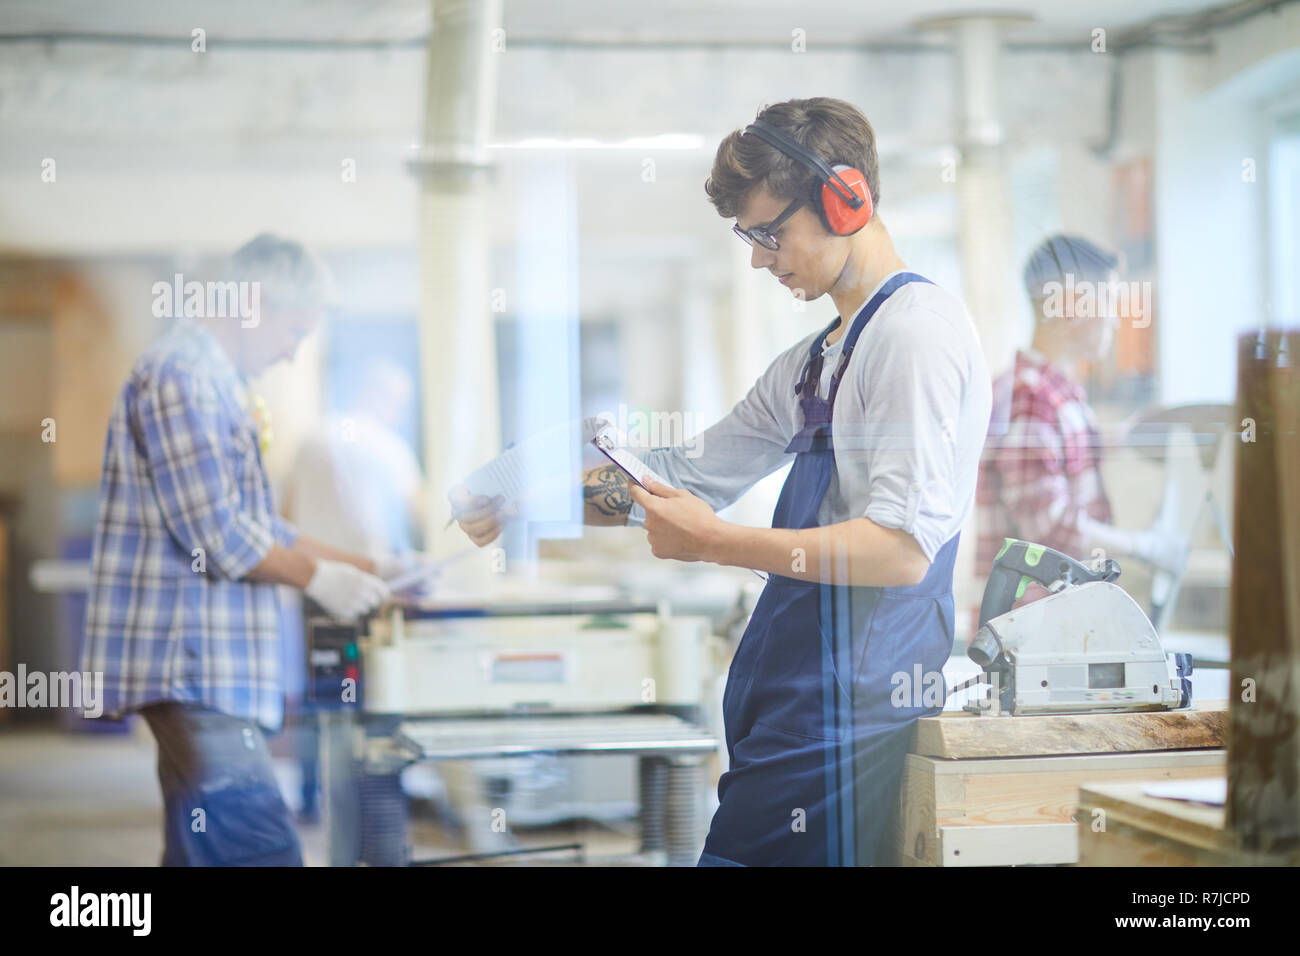 Busy young joiner reading operation manual in workshop Stock Photo